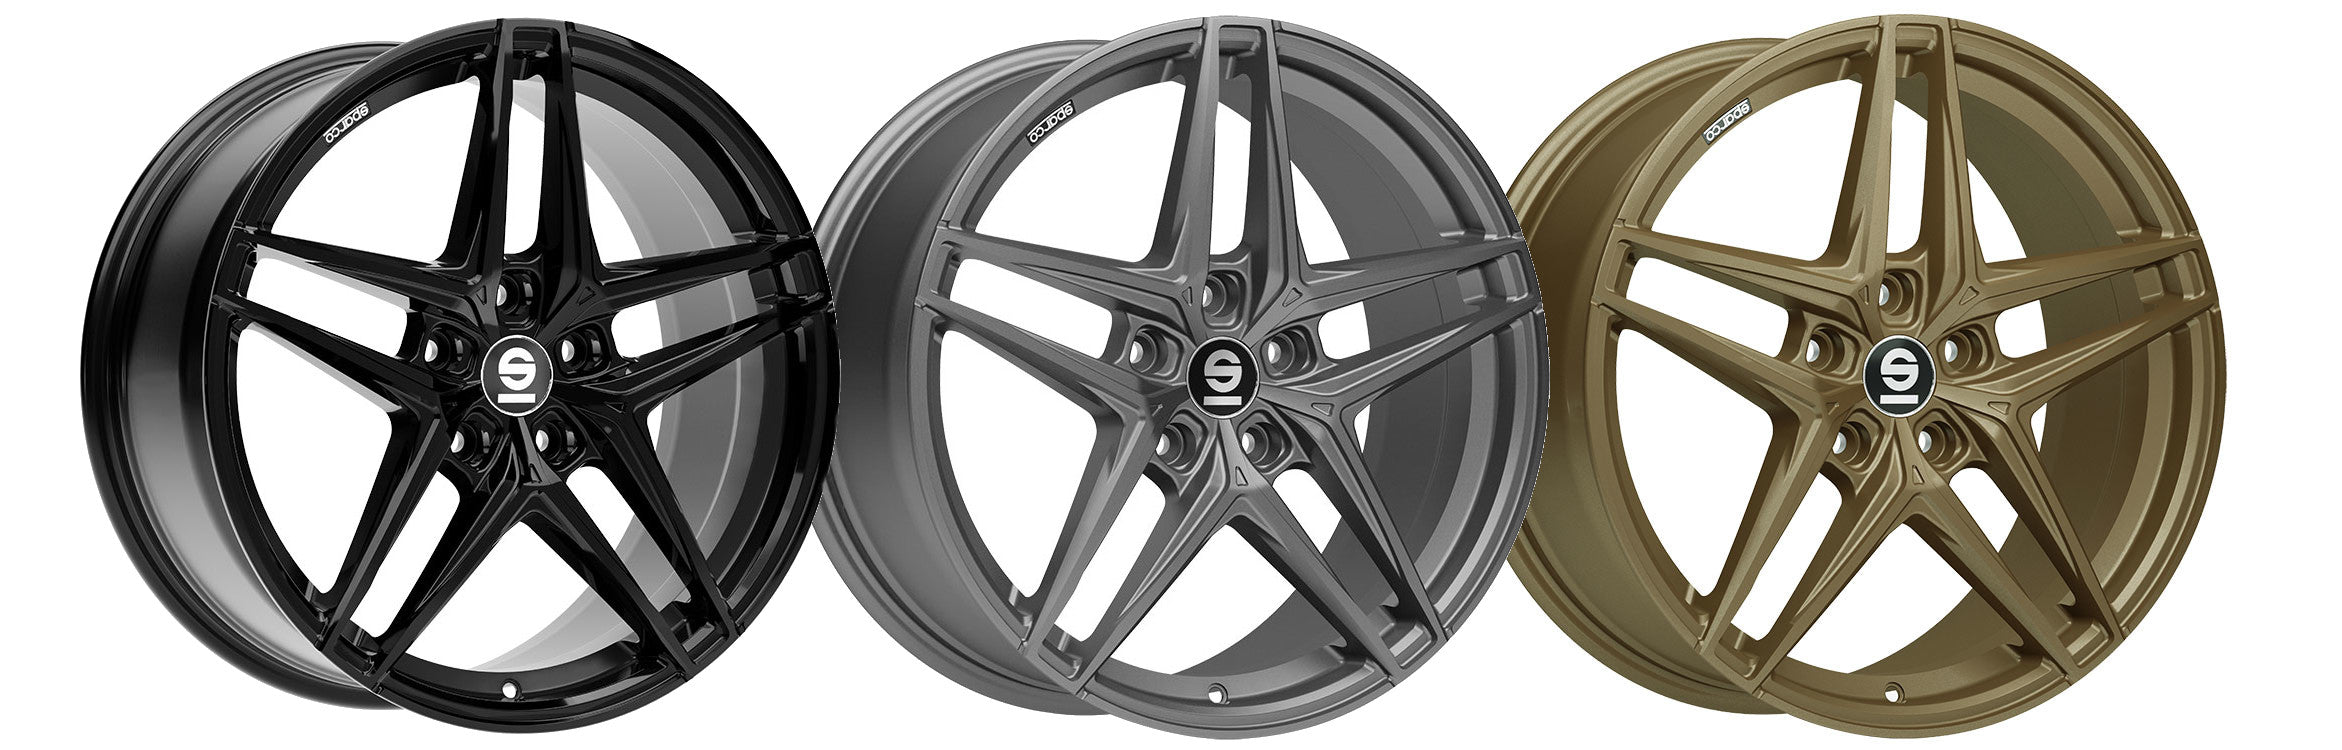 Ruote Sparco Record - Focus /Mondeo/Kuga 17", 18", 19"